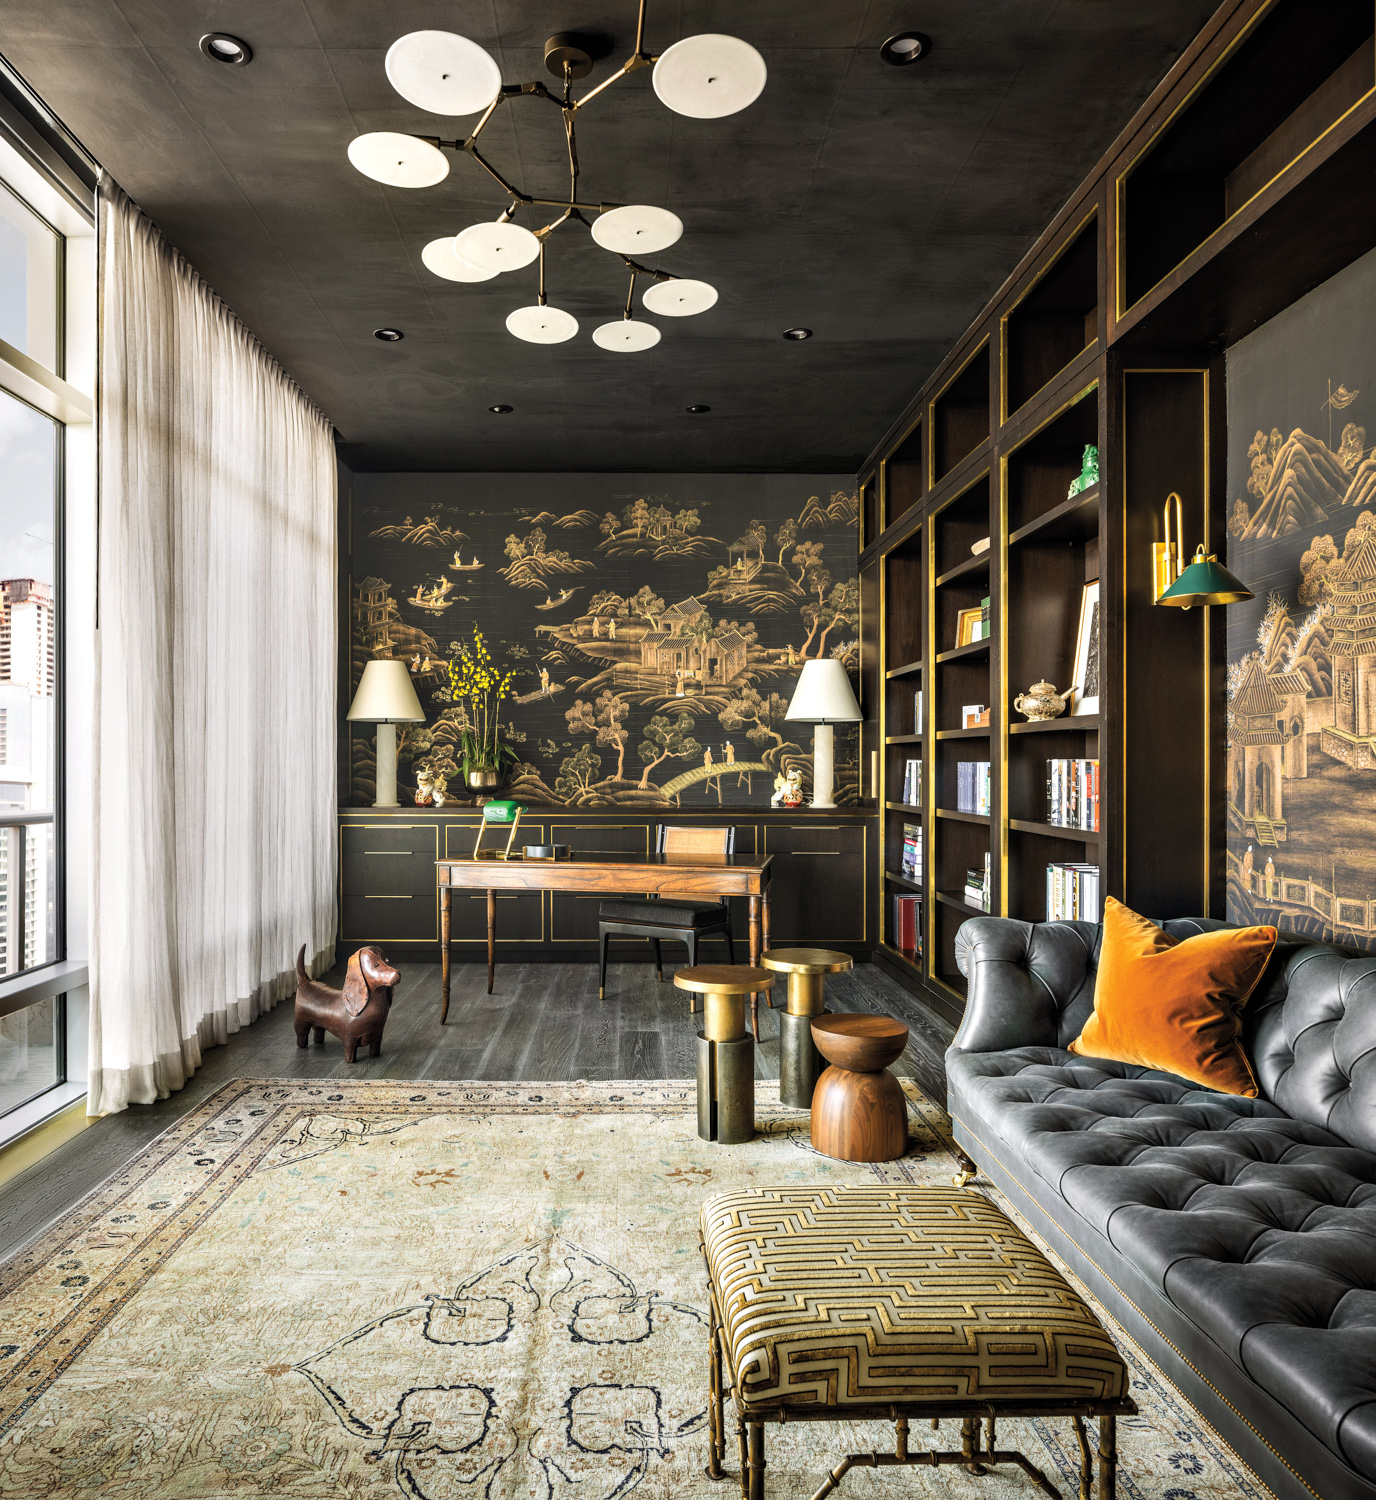 Office and lounge space with muted black ceiling and Asian-influenced painted murals on the walls